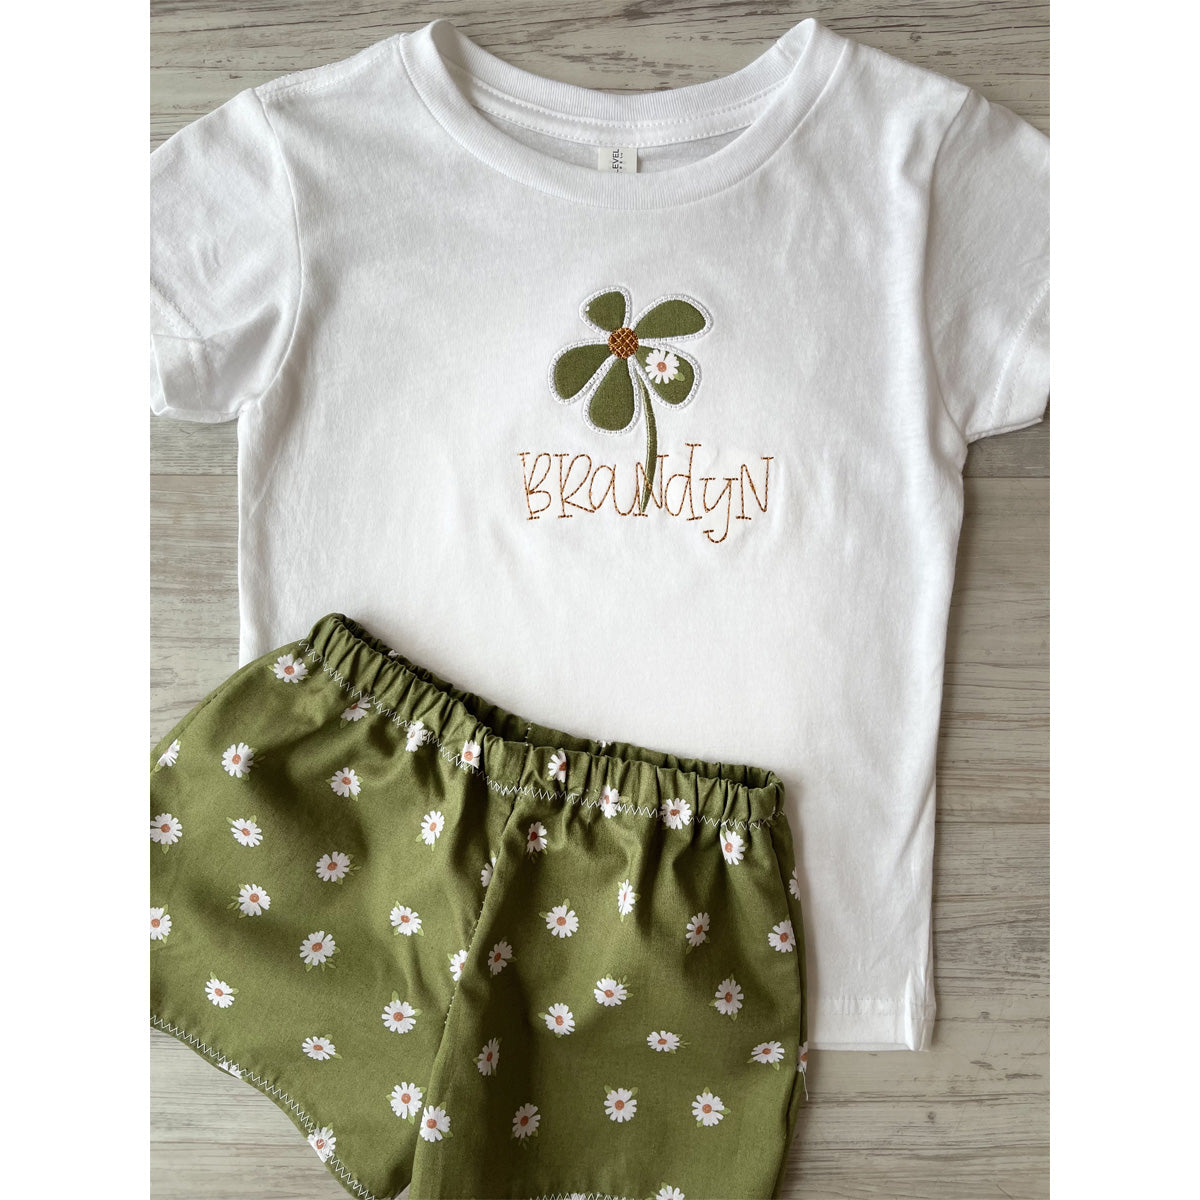 Flower Power Tee - Southern Grace Creations